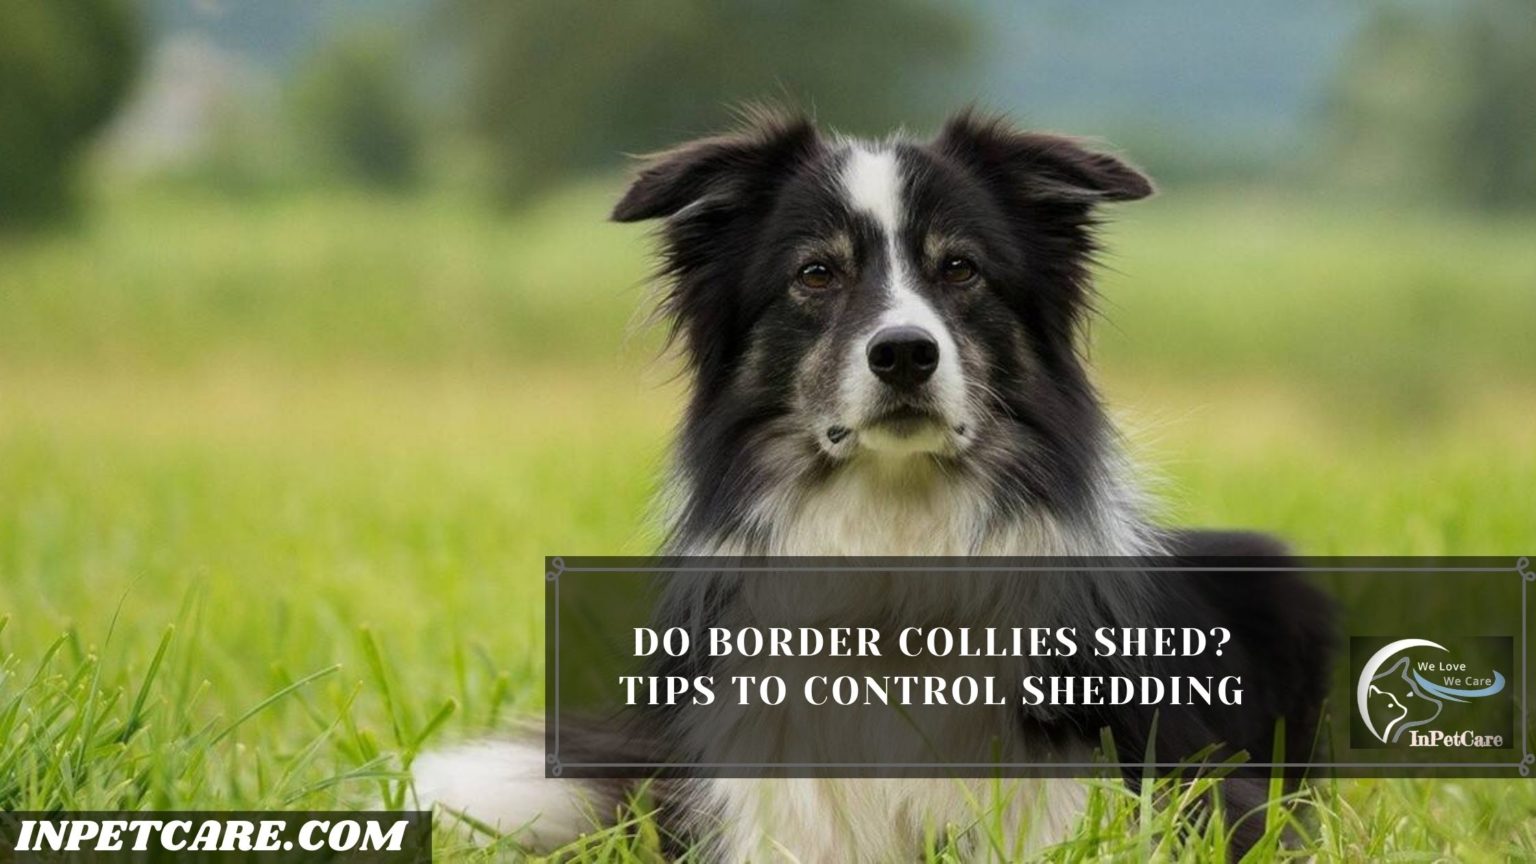 Do Border Collies Shed? Tips To Control Shedding